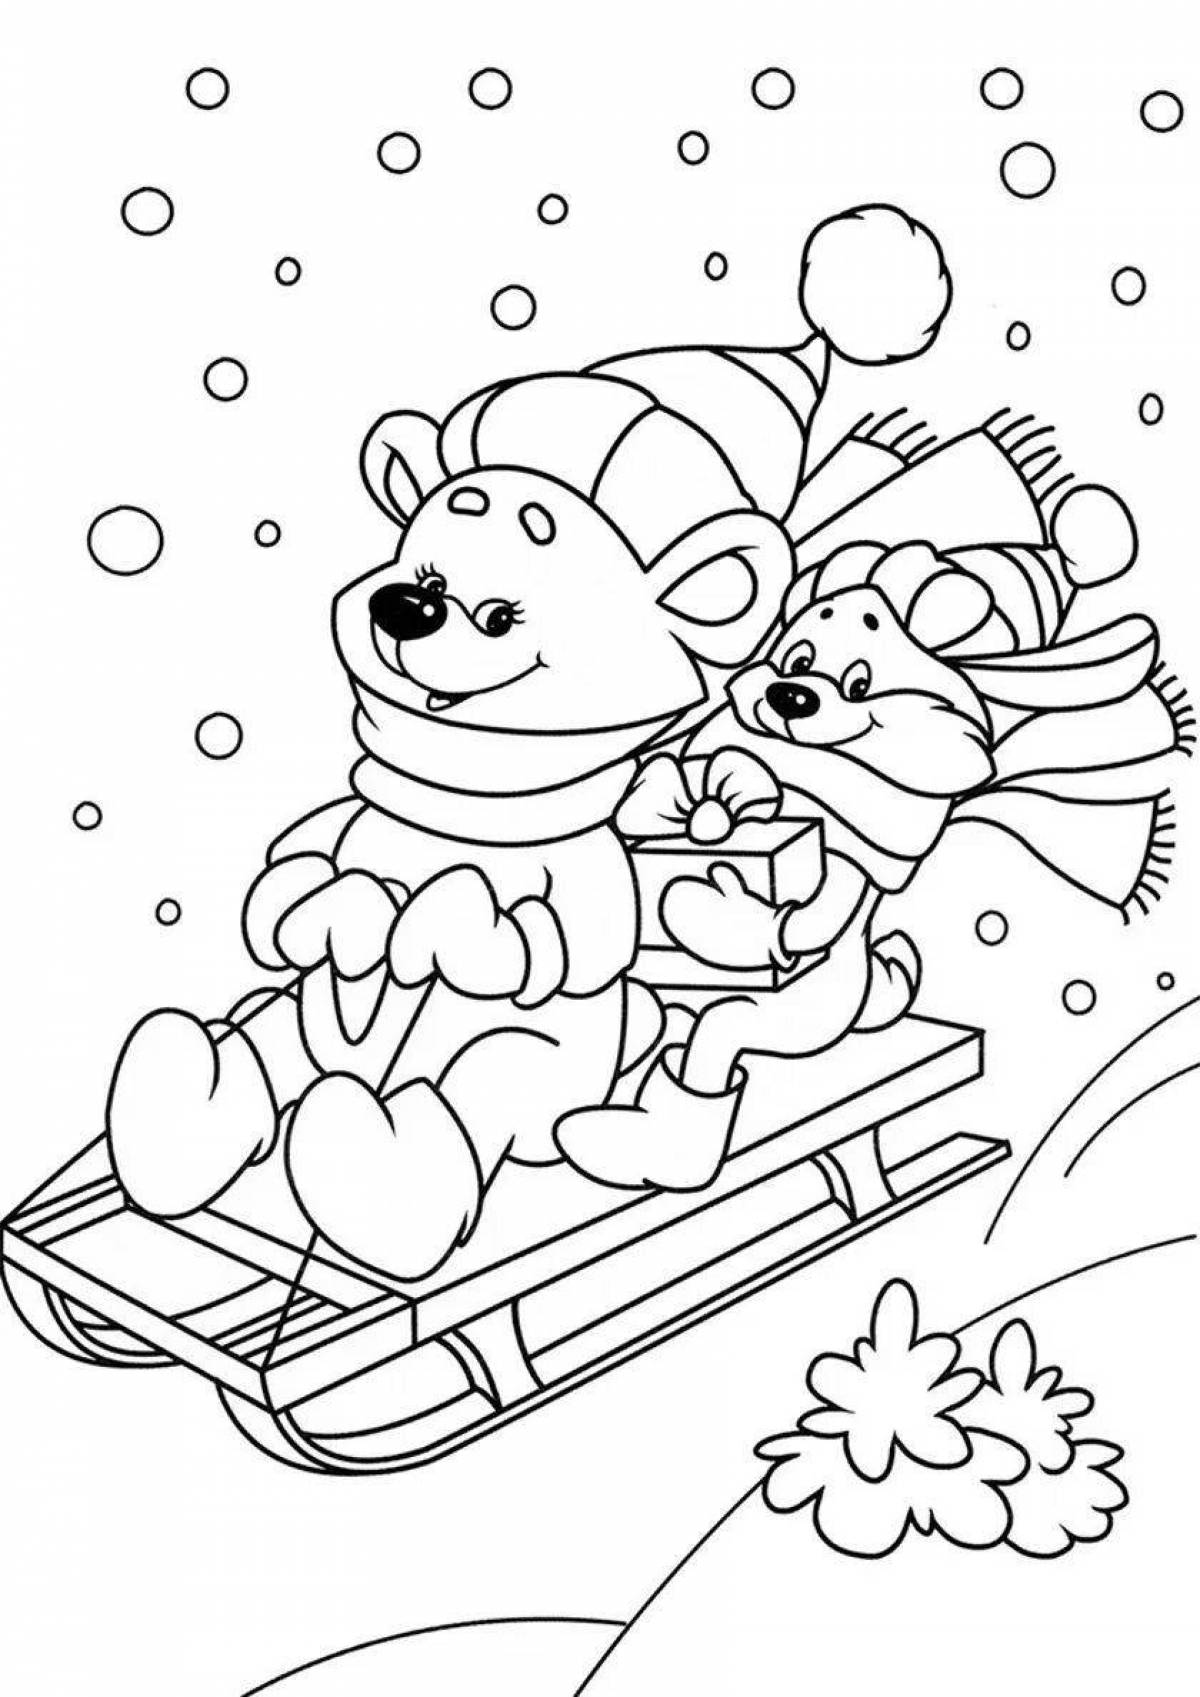 Coloring page cold wonderland